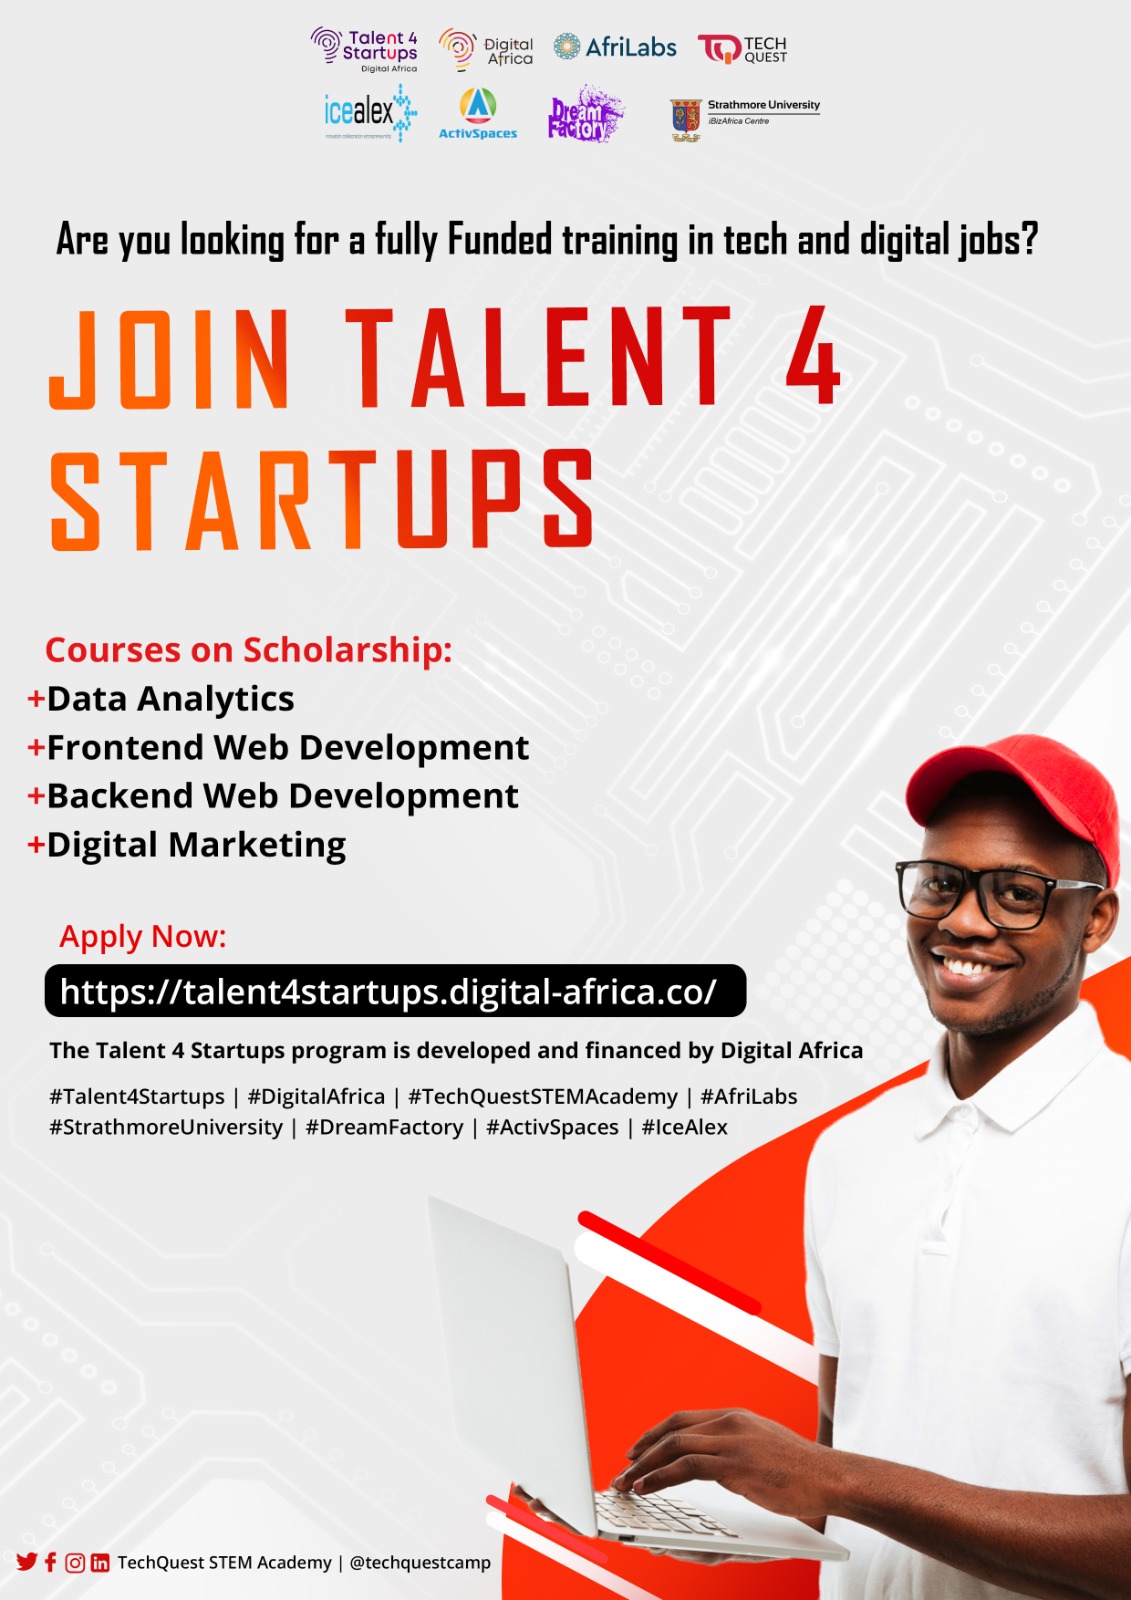 Digital Africa Talent 4 Startups Program |Free Digital Training and Employment Opportunities to Youths in Africa